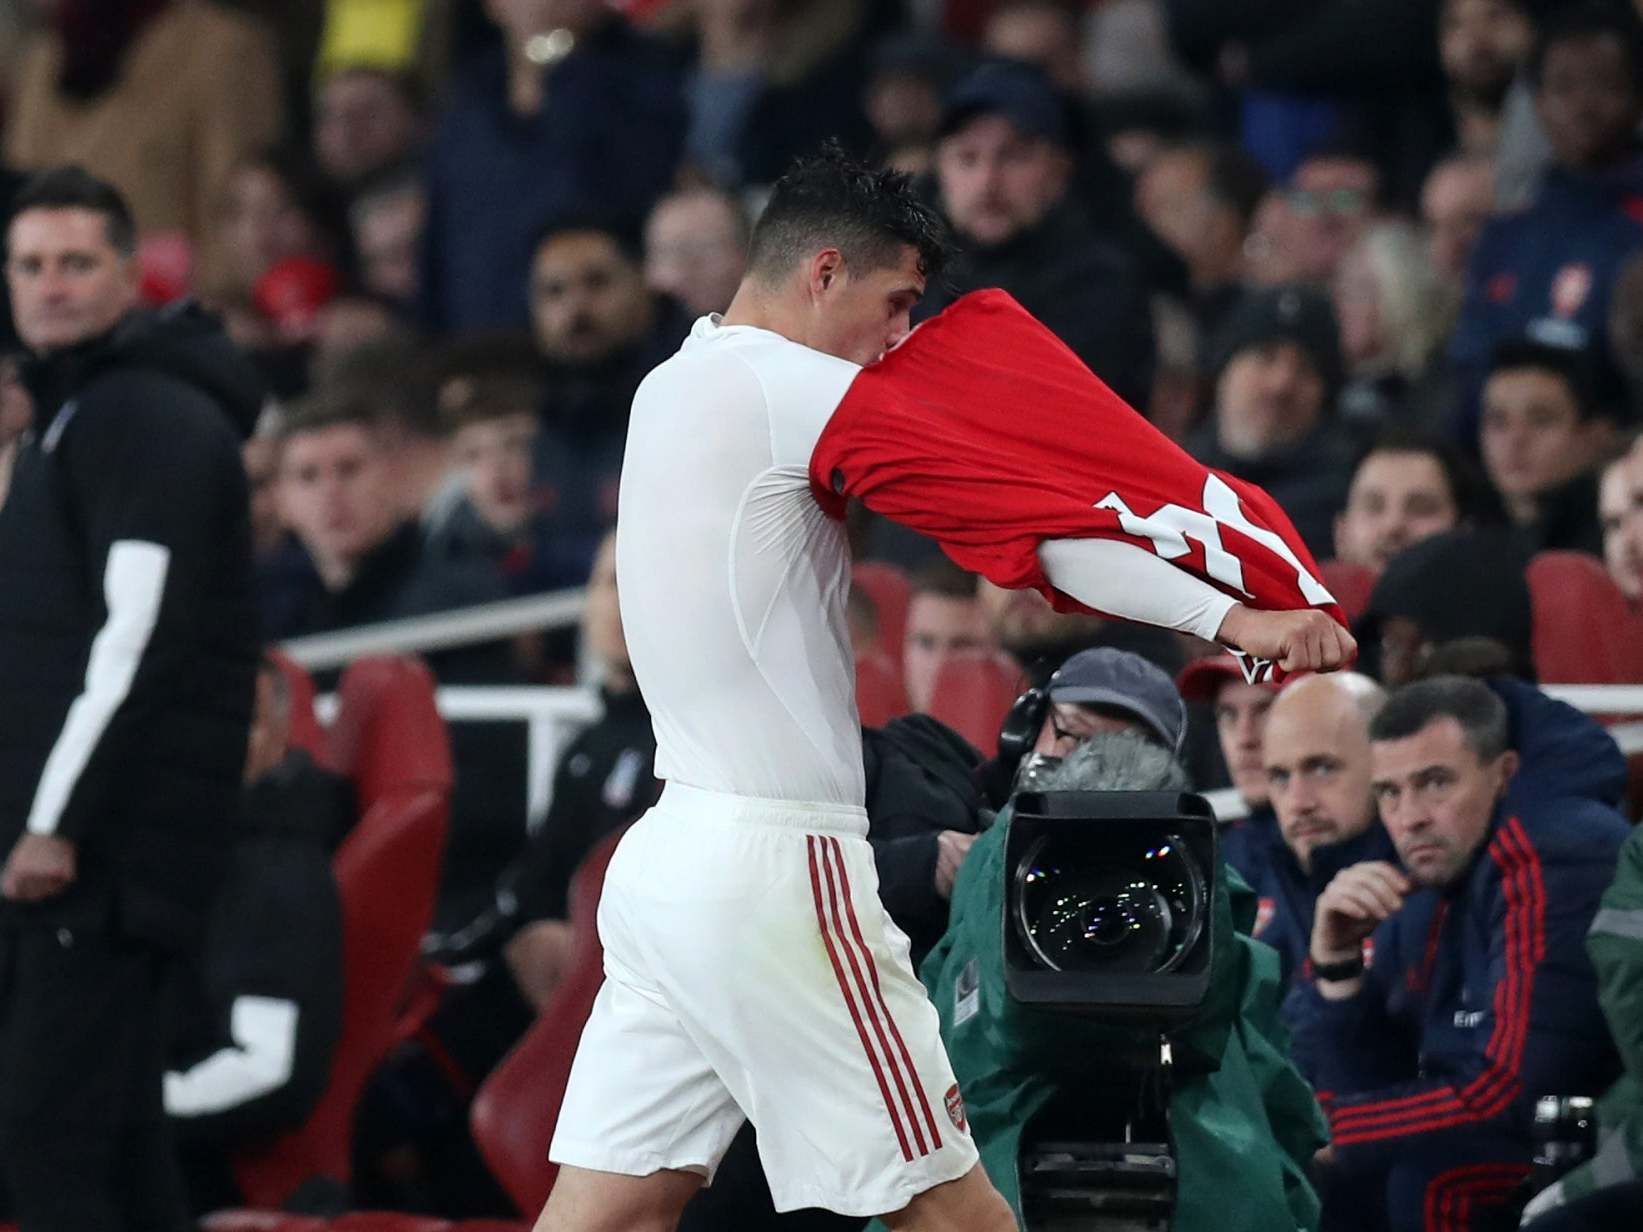 Xhaka storms down the tunnel after being booed by Arsenal fans